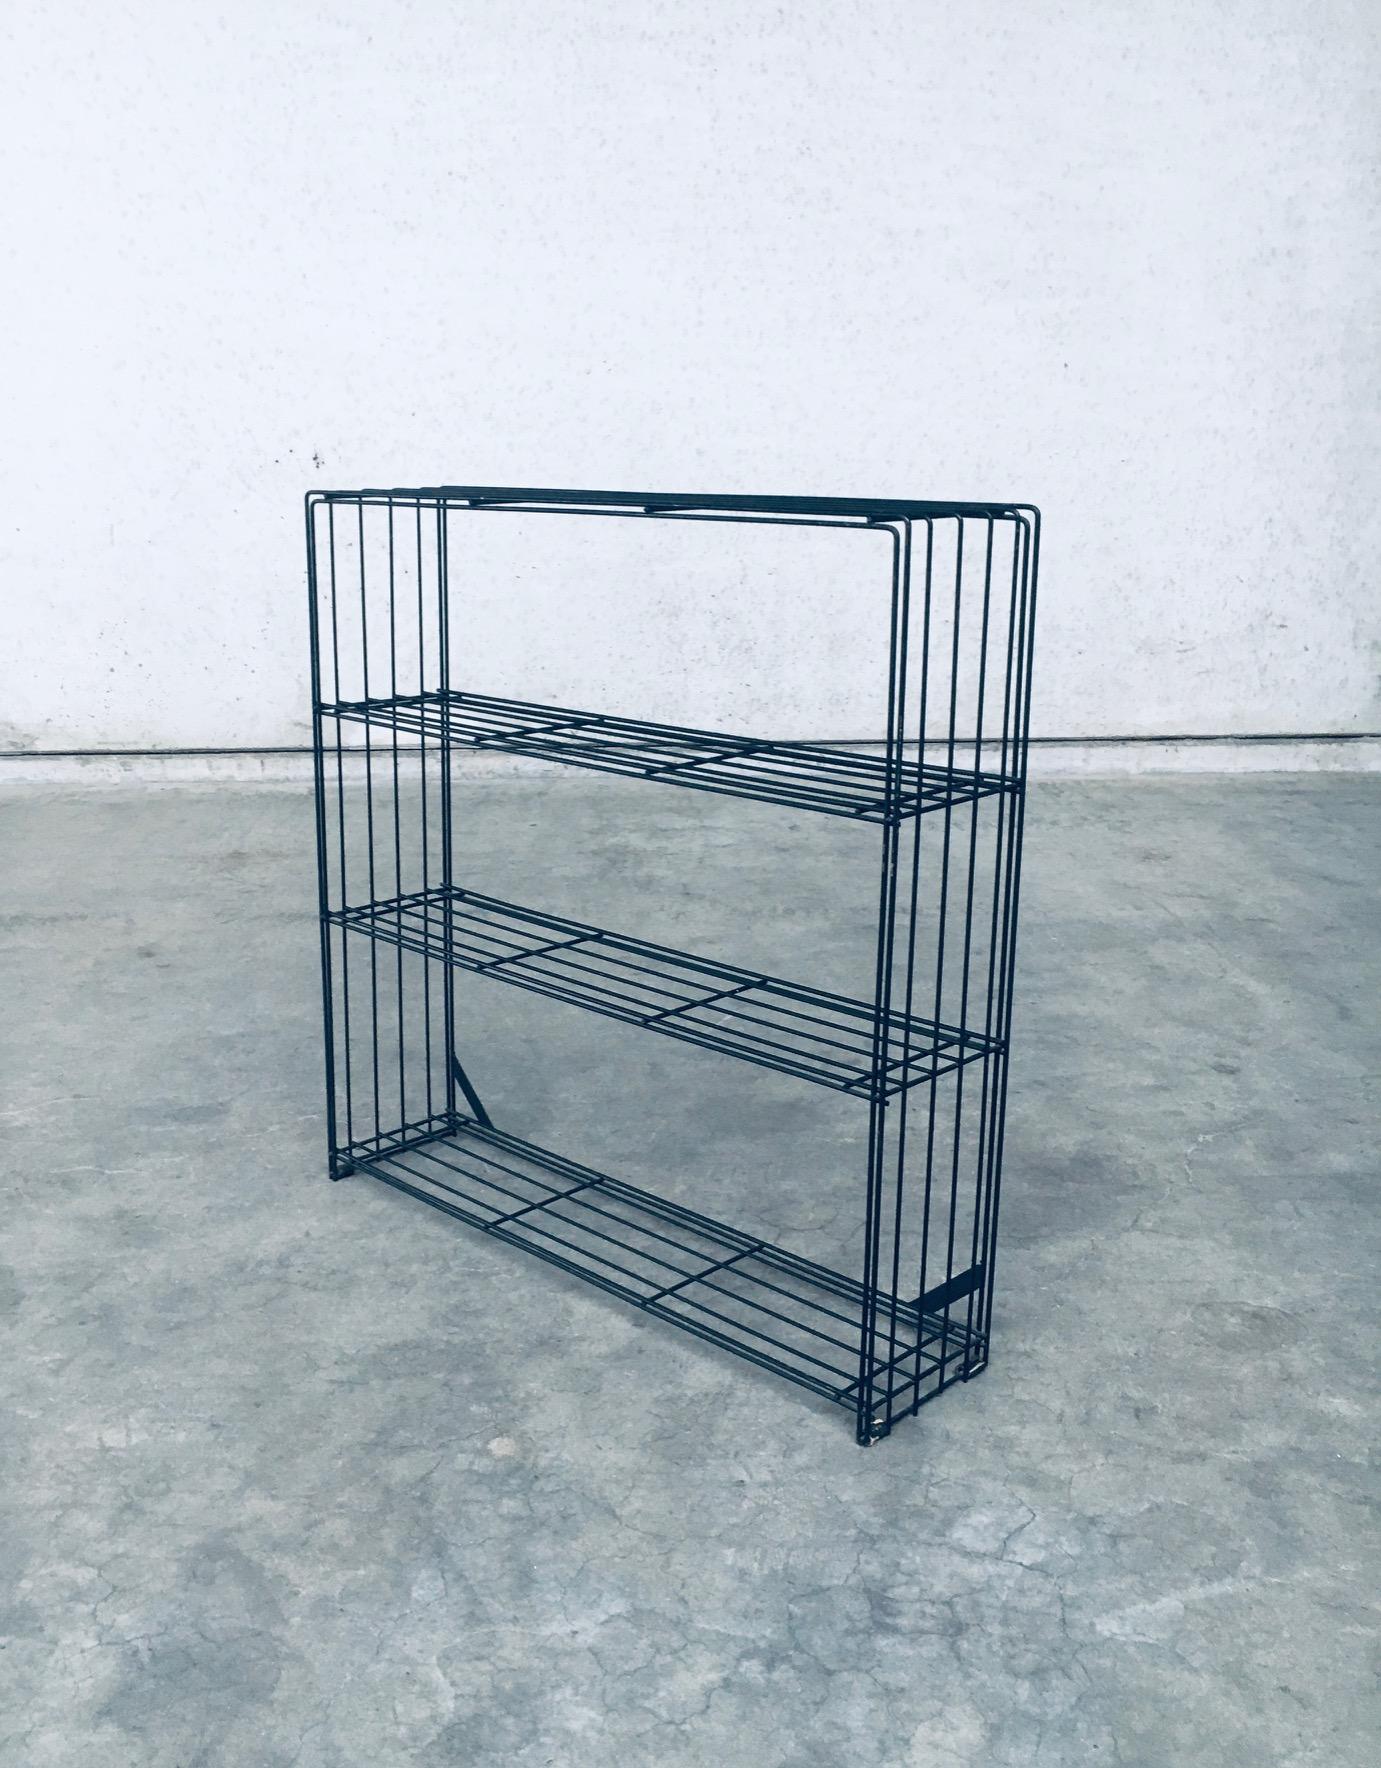 Vintage Midcentury Modern Dutch Industrial Design Storage Rack by Tjerk Reijenga for Pilastro. Made in the Netherlands, 1958. Minimalist and architectural in design. Storage rack, display shelves or book case. Black lacquered metal wire frame